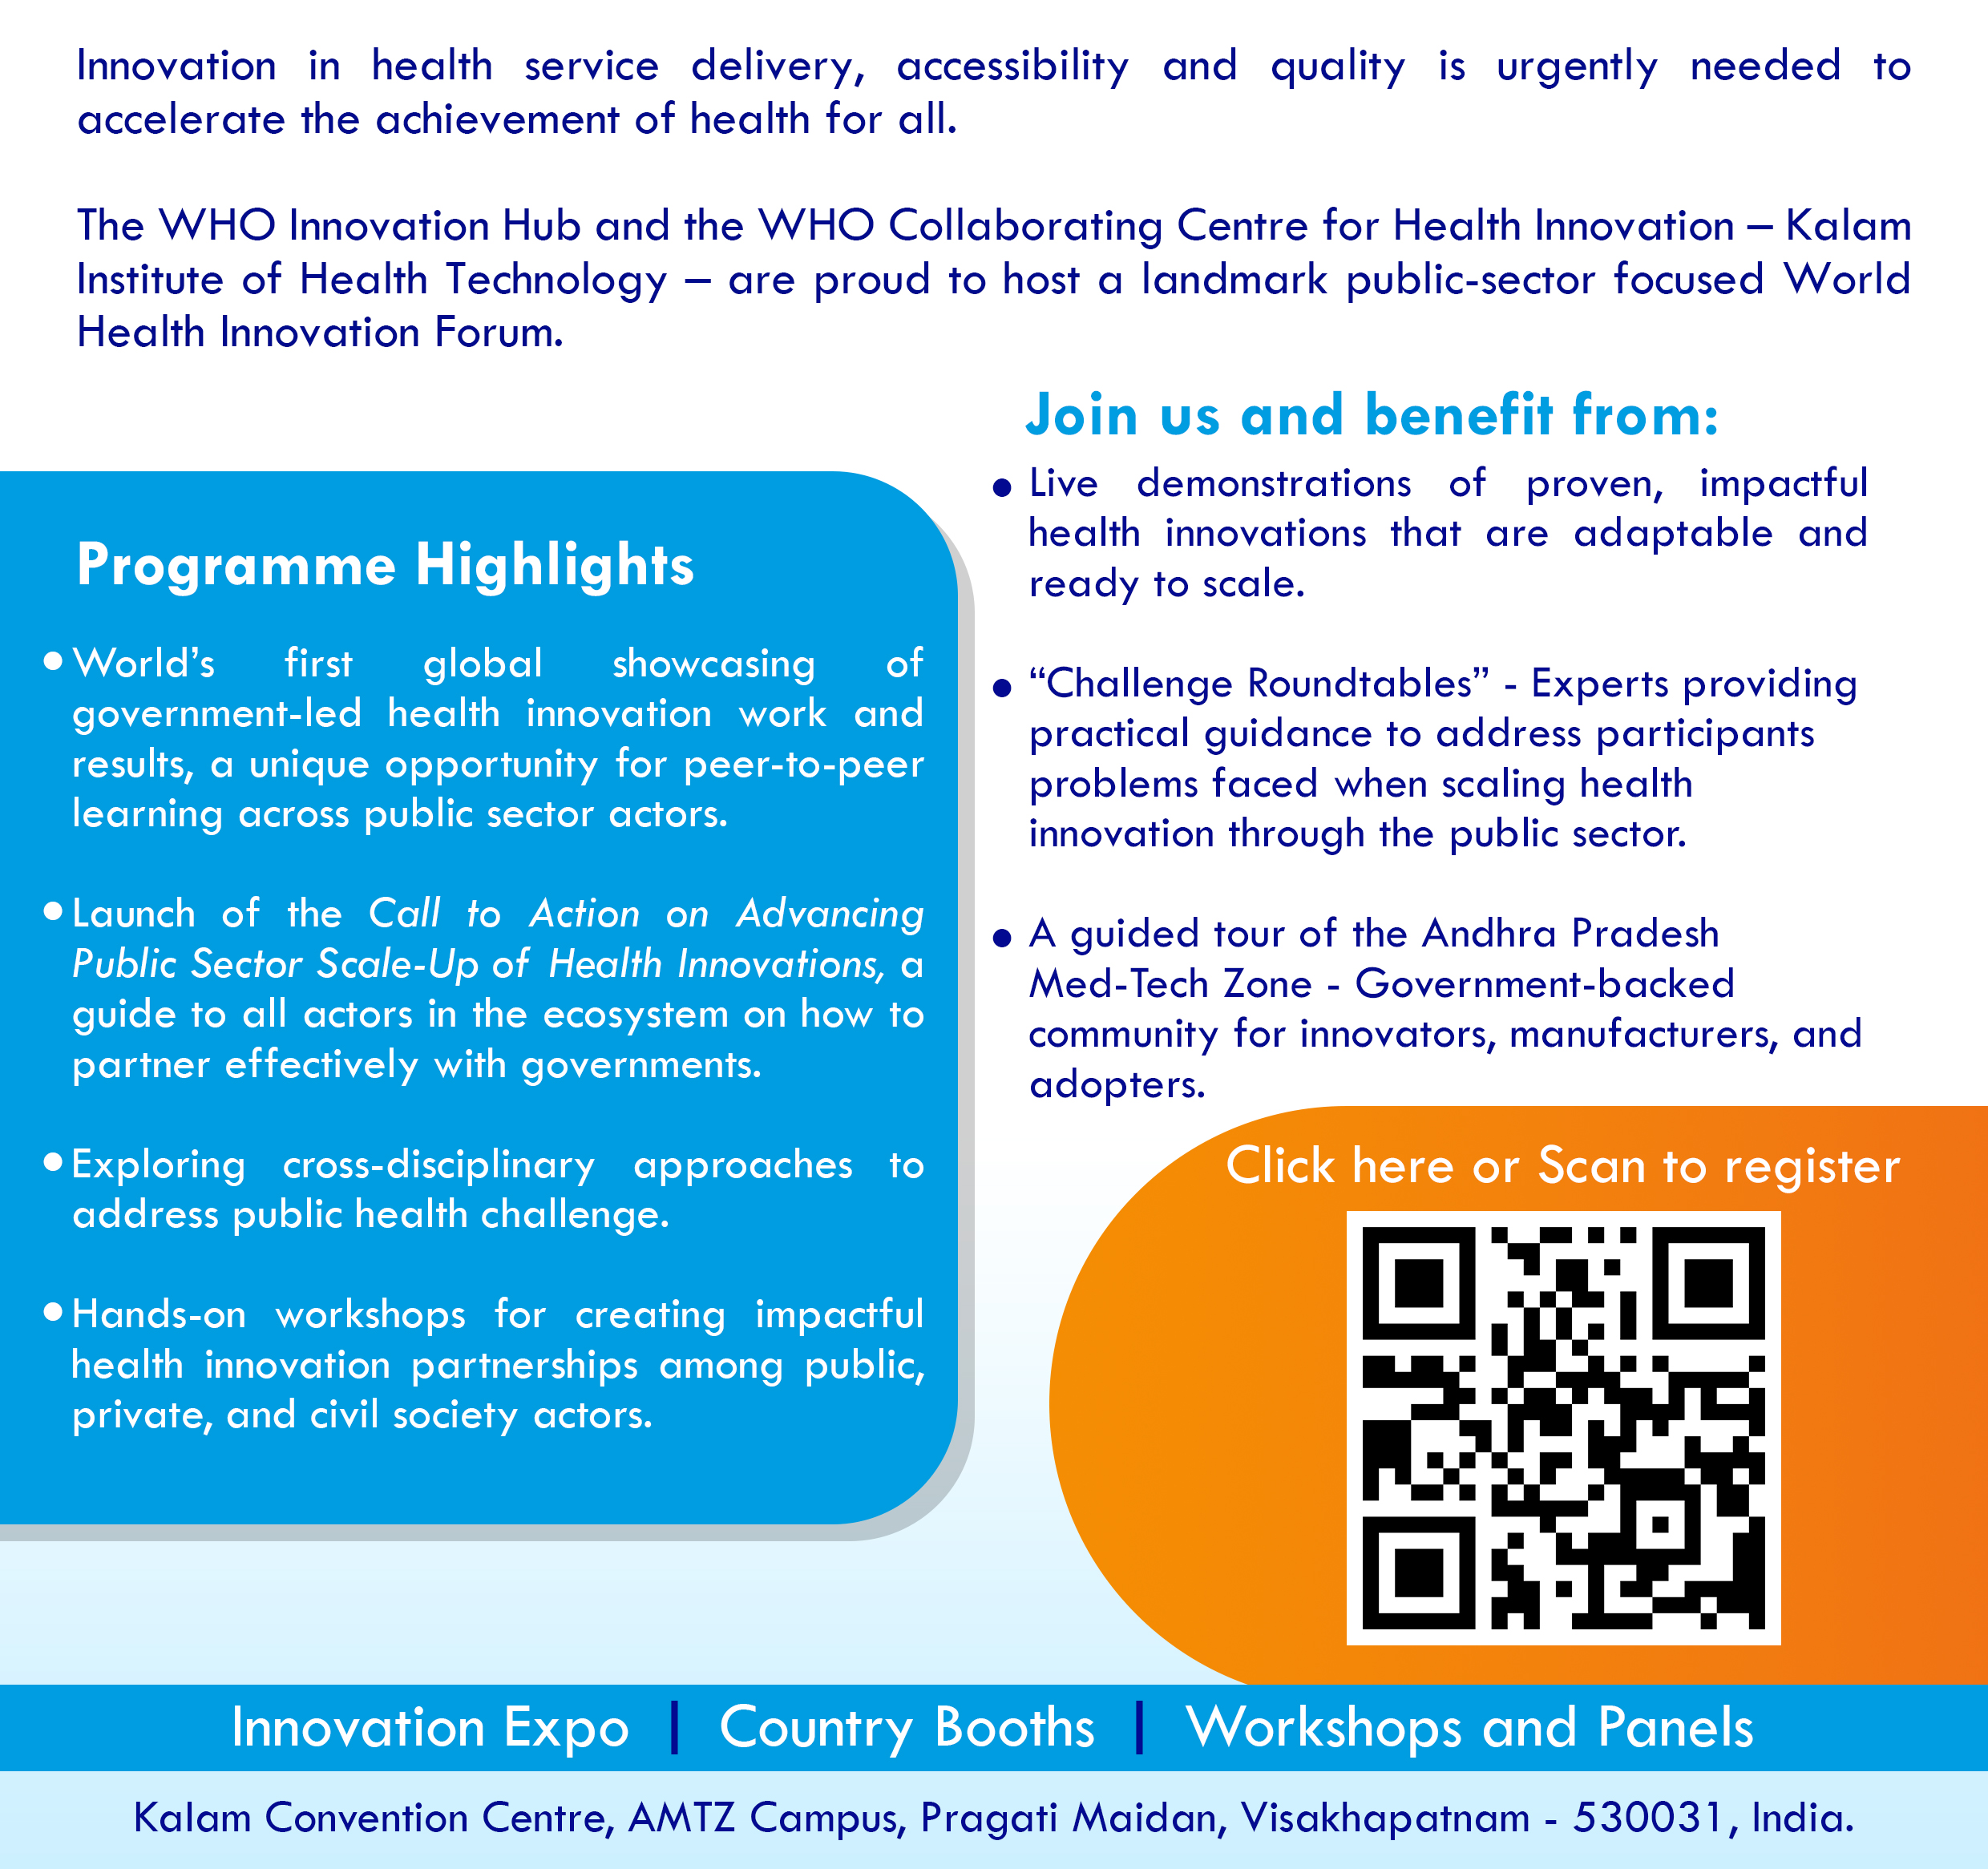 KIHT - WHO Collaborating Centre - World Health Innovation Forum programme highlights and objectives